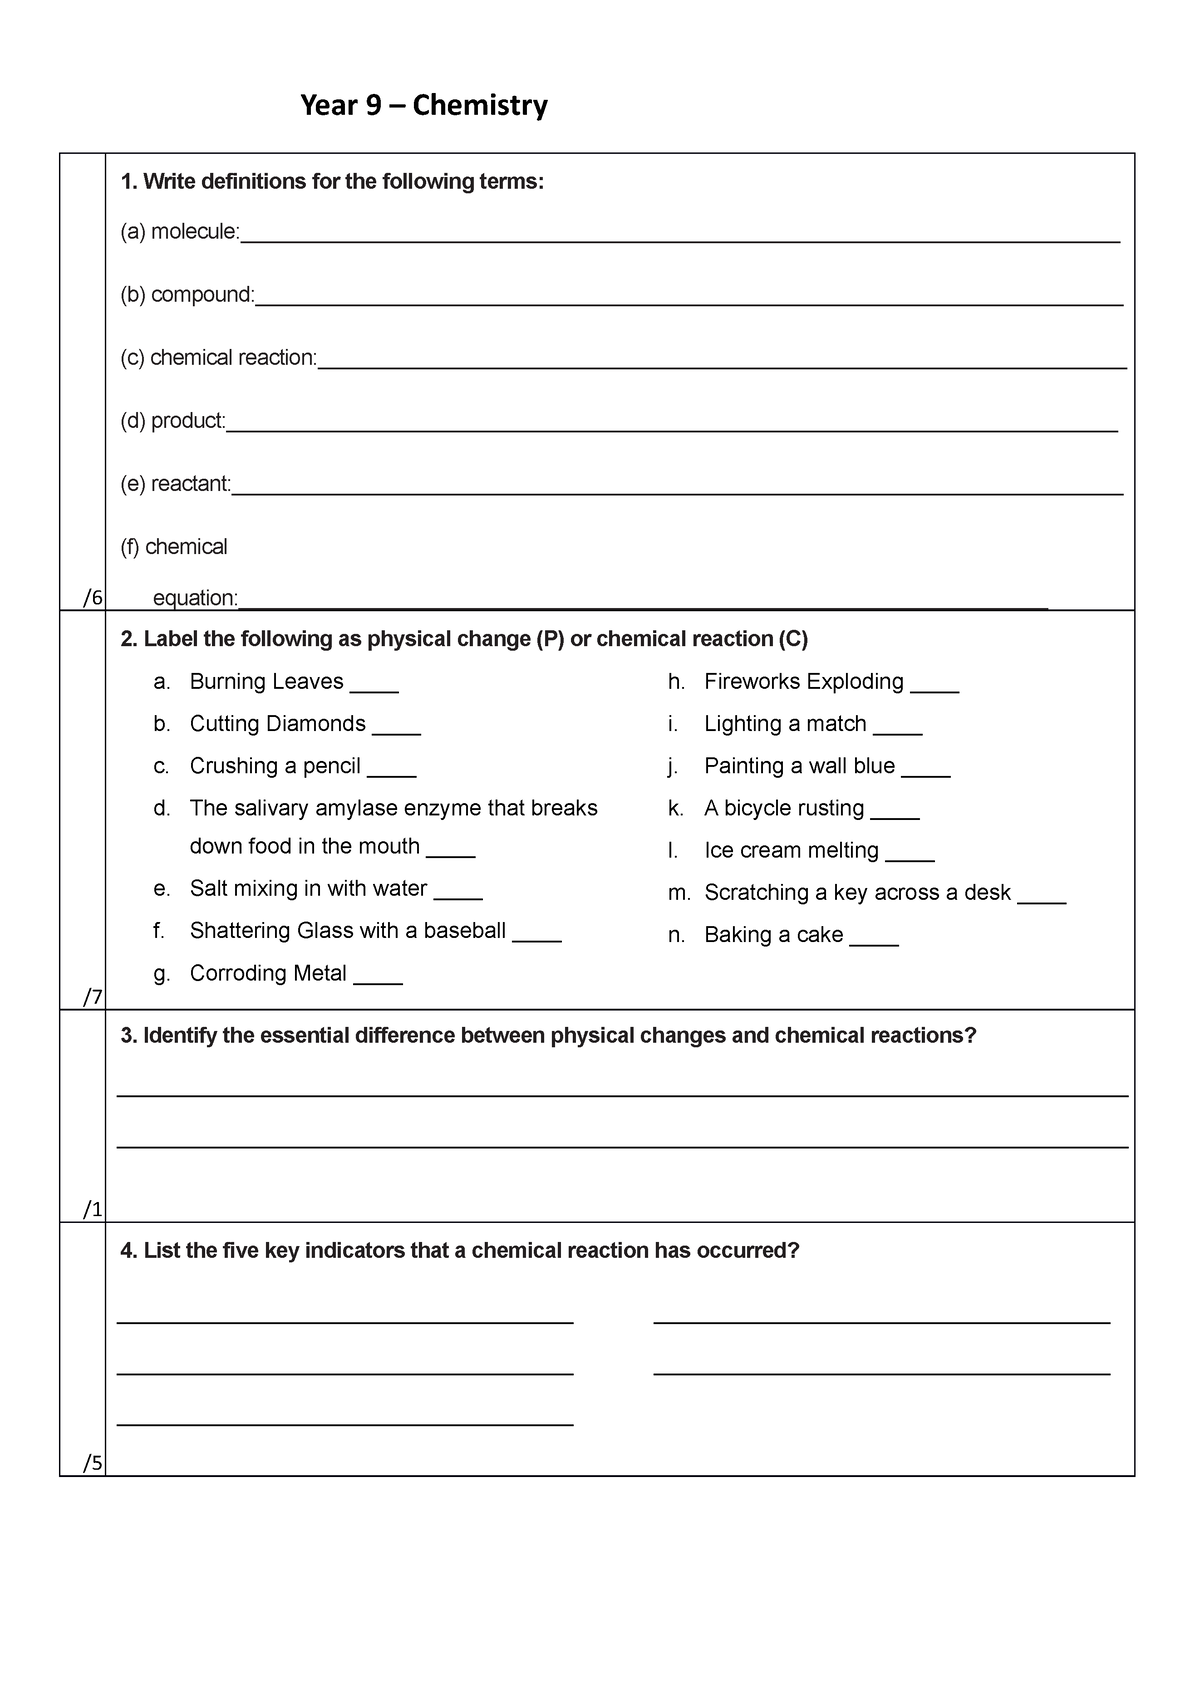 Yr 9 chemsitry - for year 9 chemistry science content - Year 9 ...